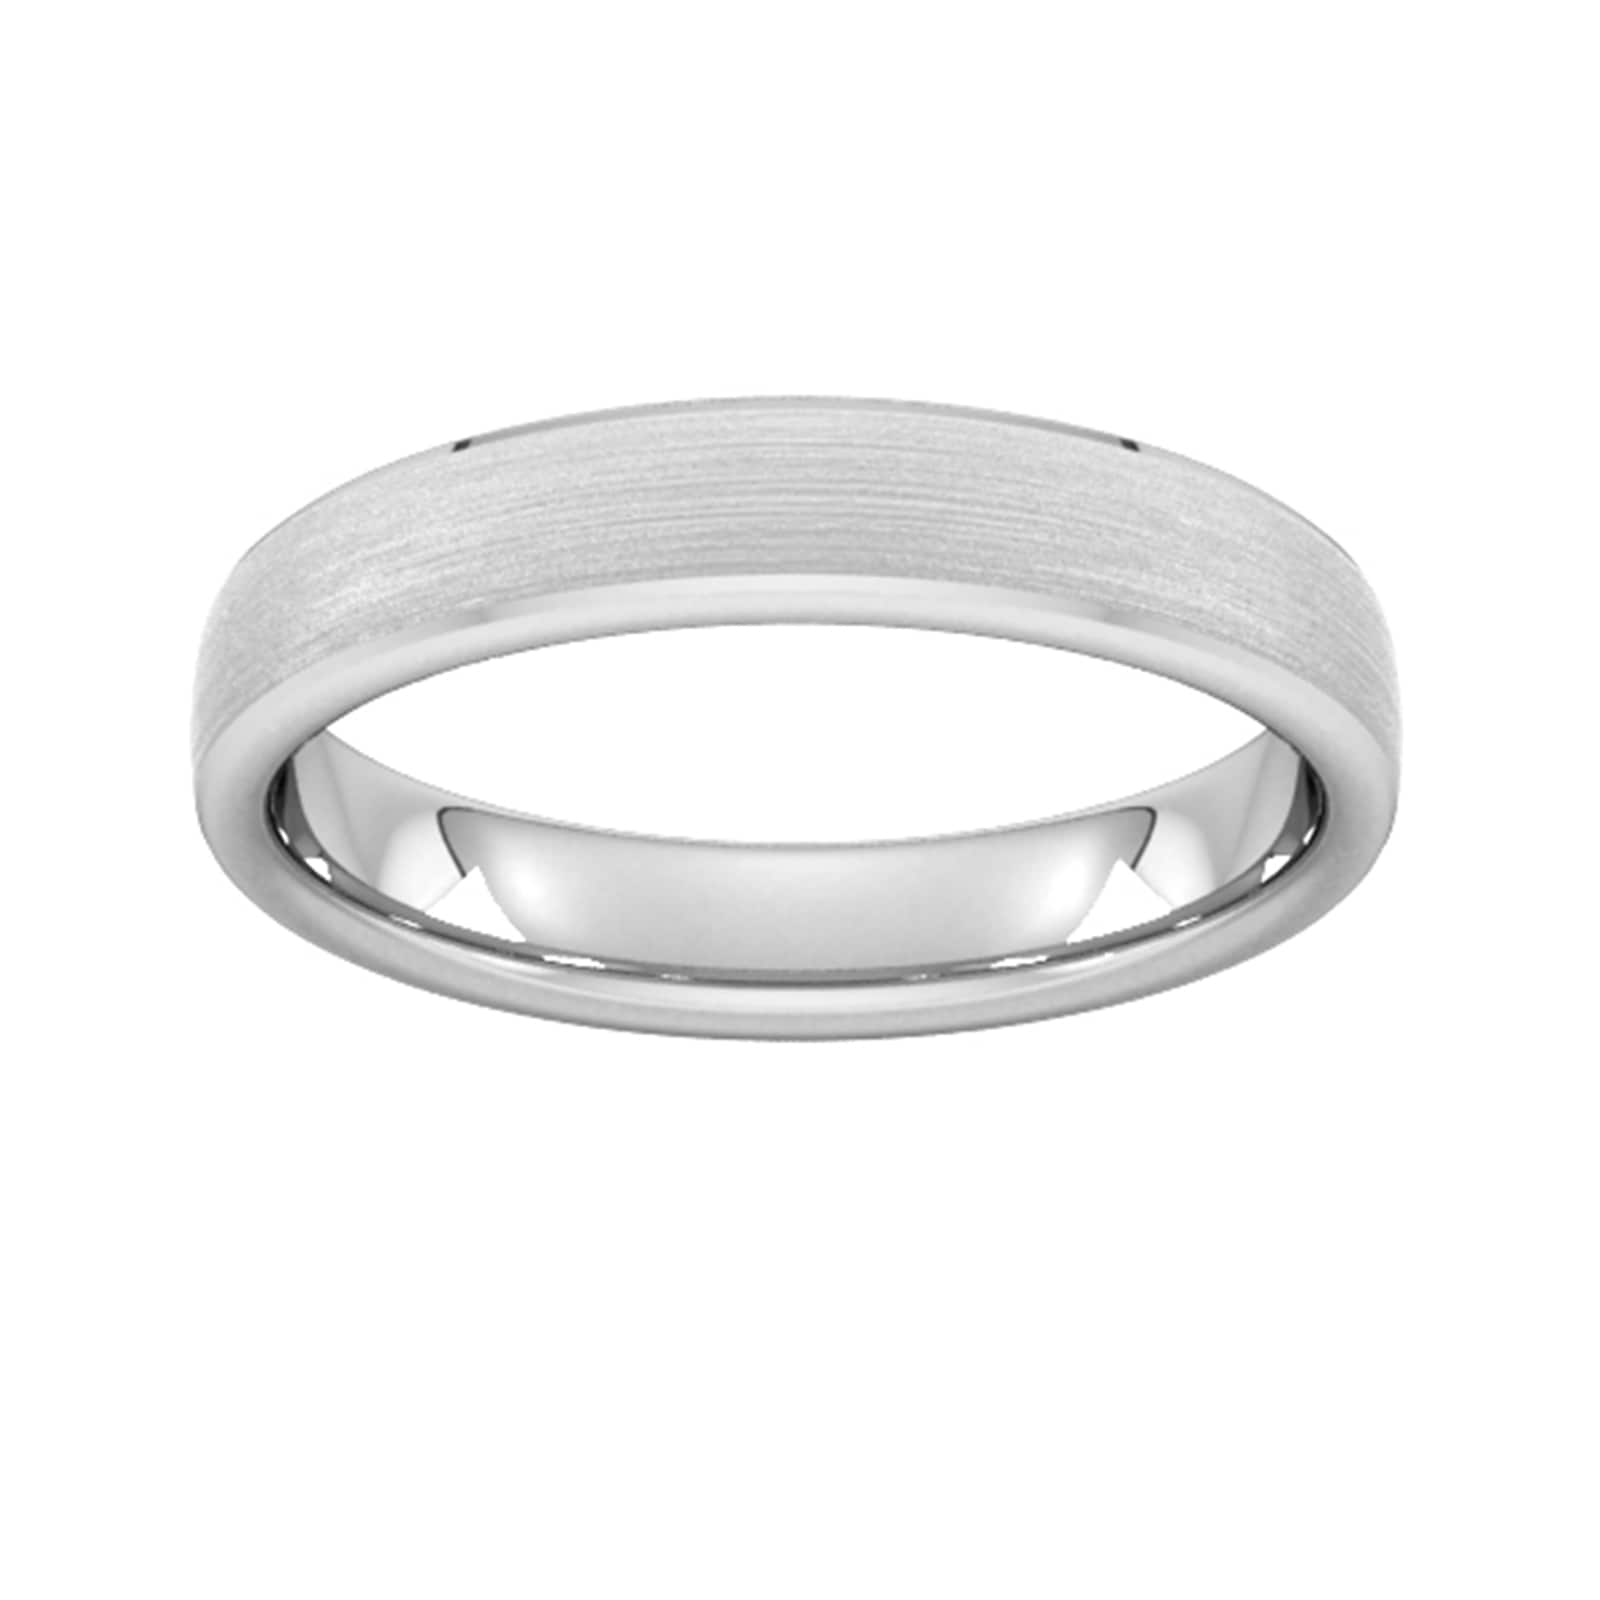 4mm Traditional Court Heavy Polished Chamfered Edges With Matt Centre Wedding Ring In 18 Carat White Gold - Ring Size P